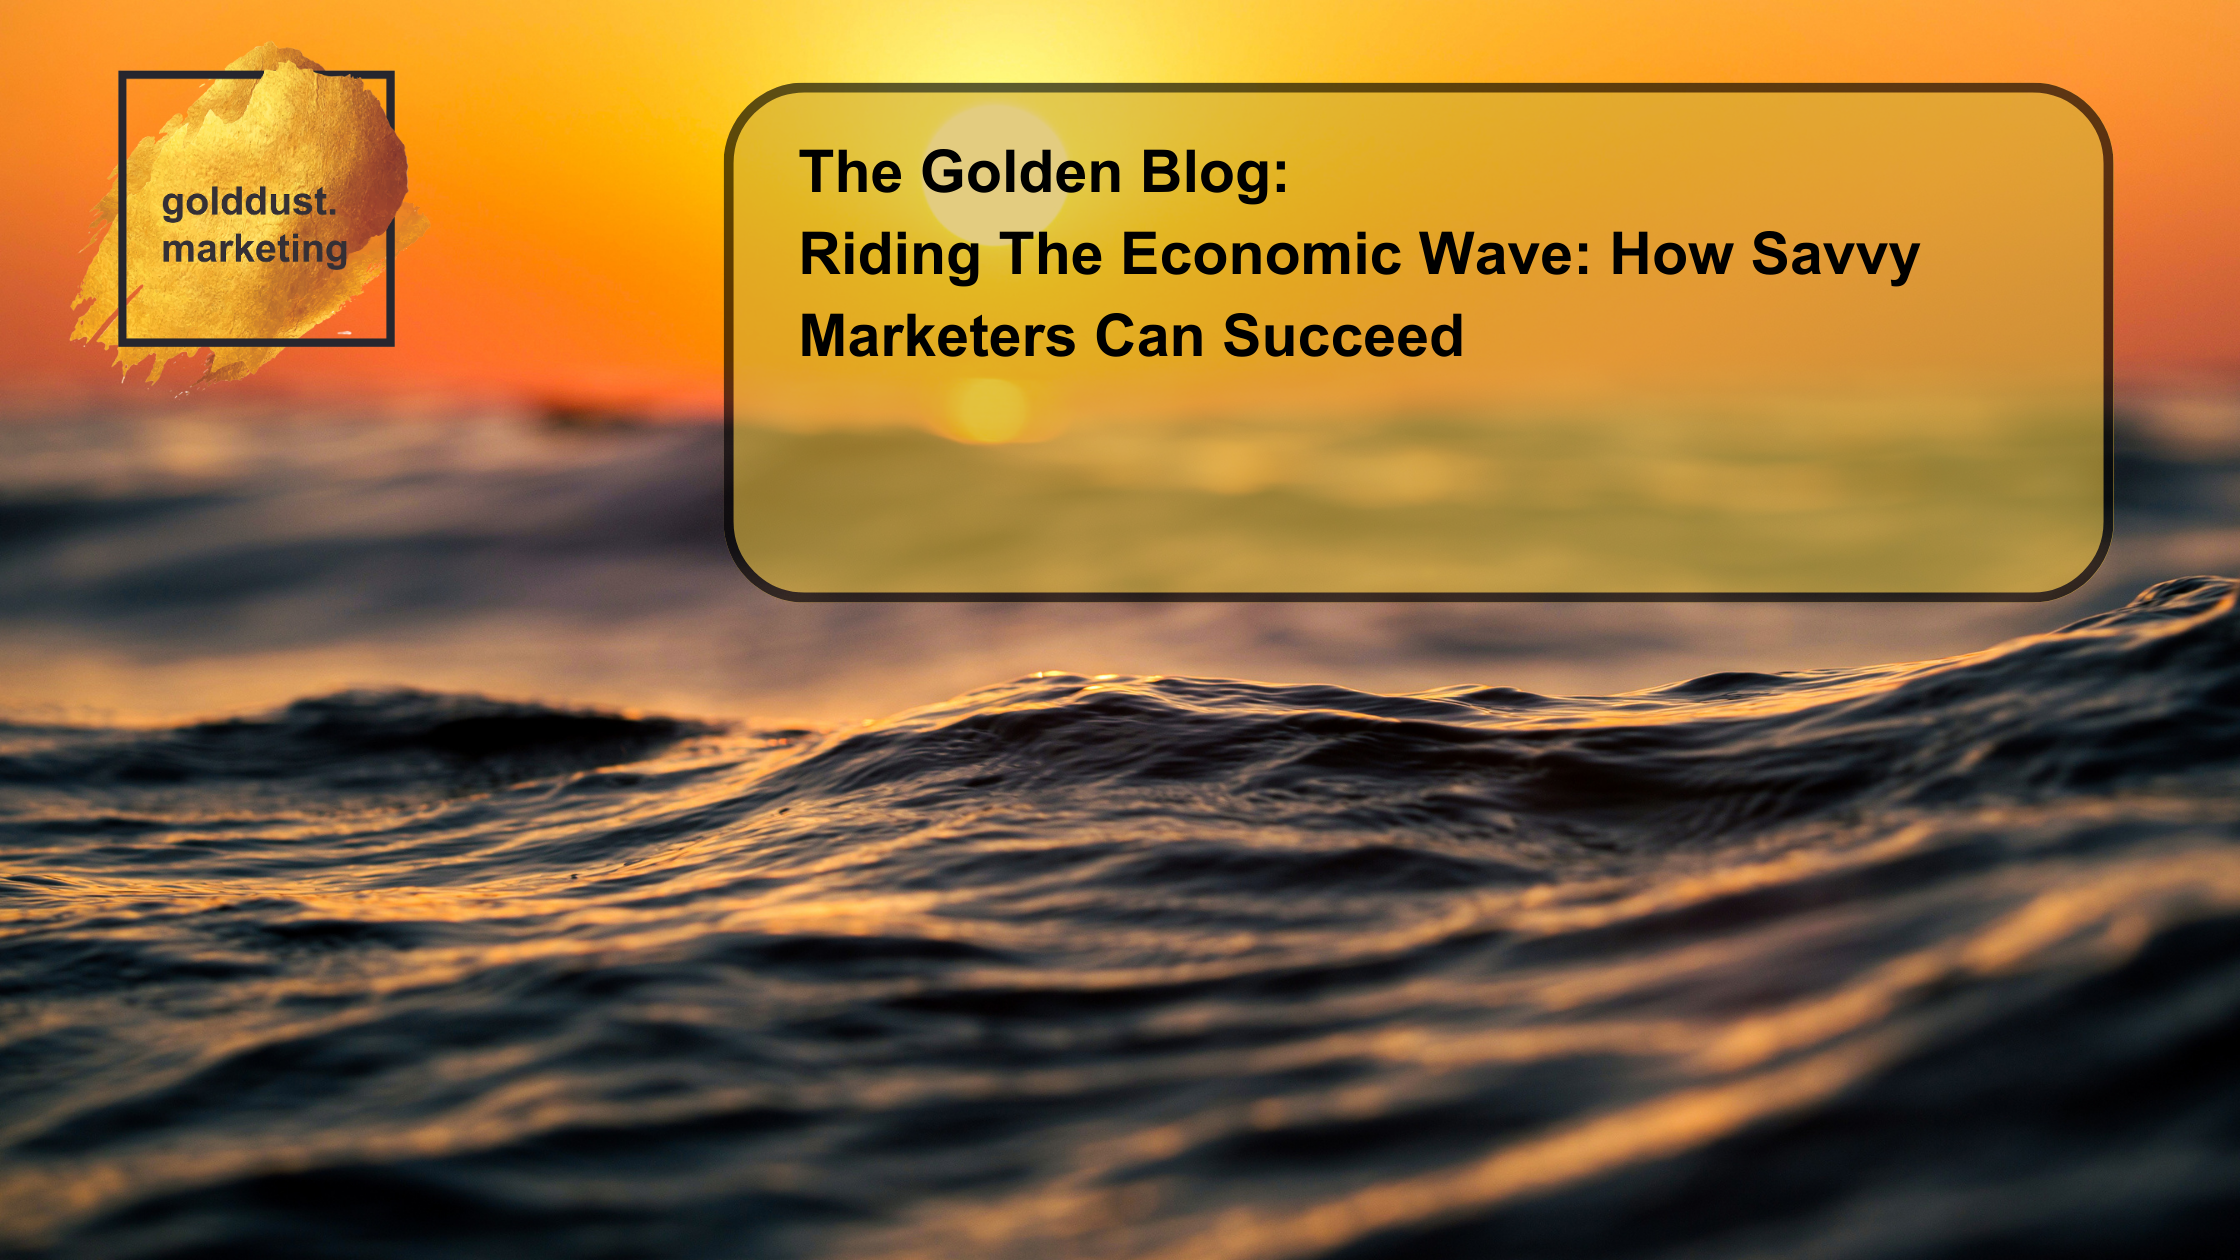 Riding The Economic Wave: How Savvy Marketers Can Succeed